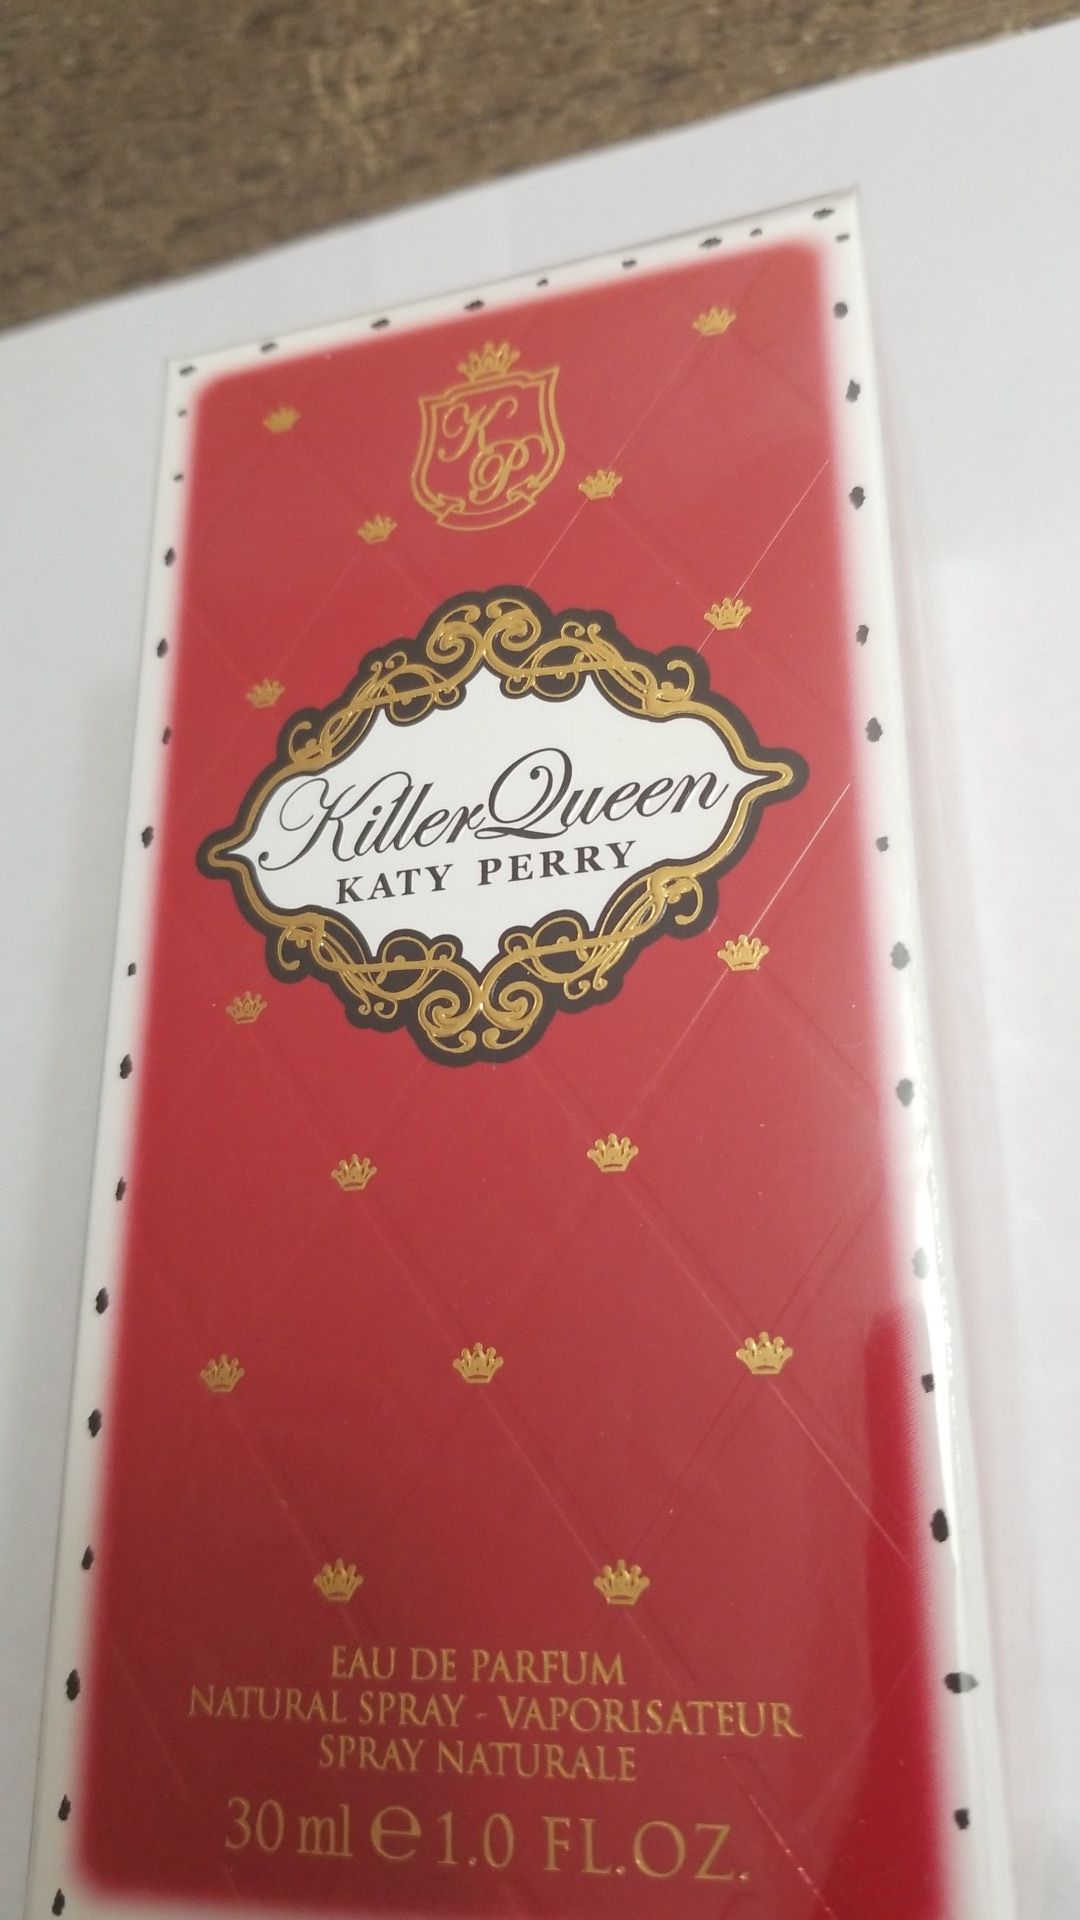 Killer Queen by Katy Perry perfume 1oz